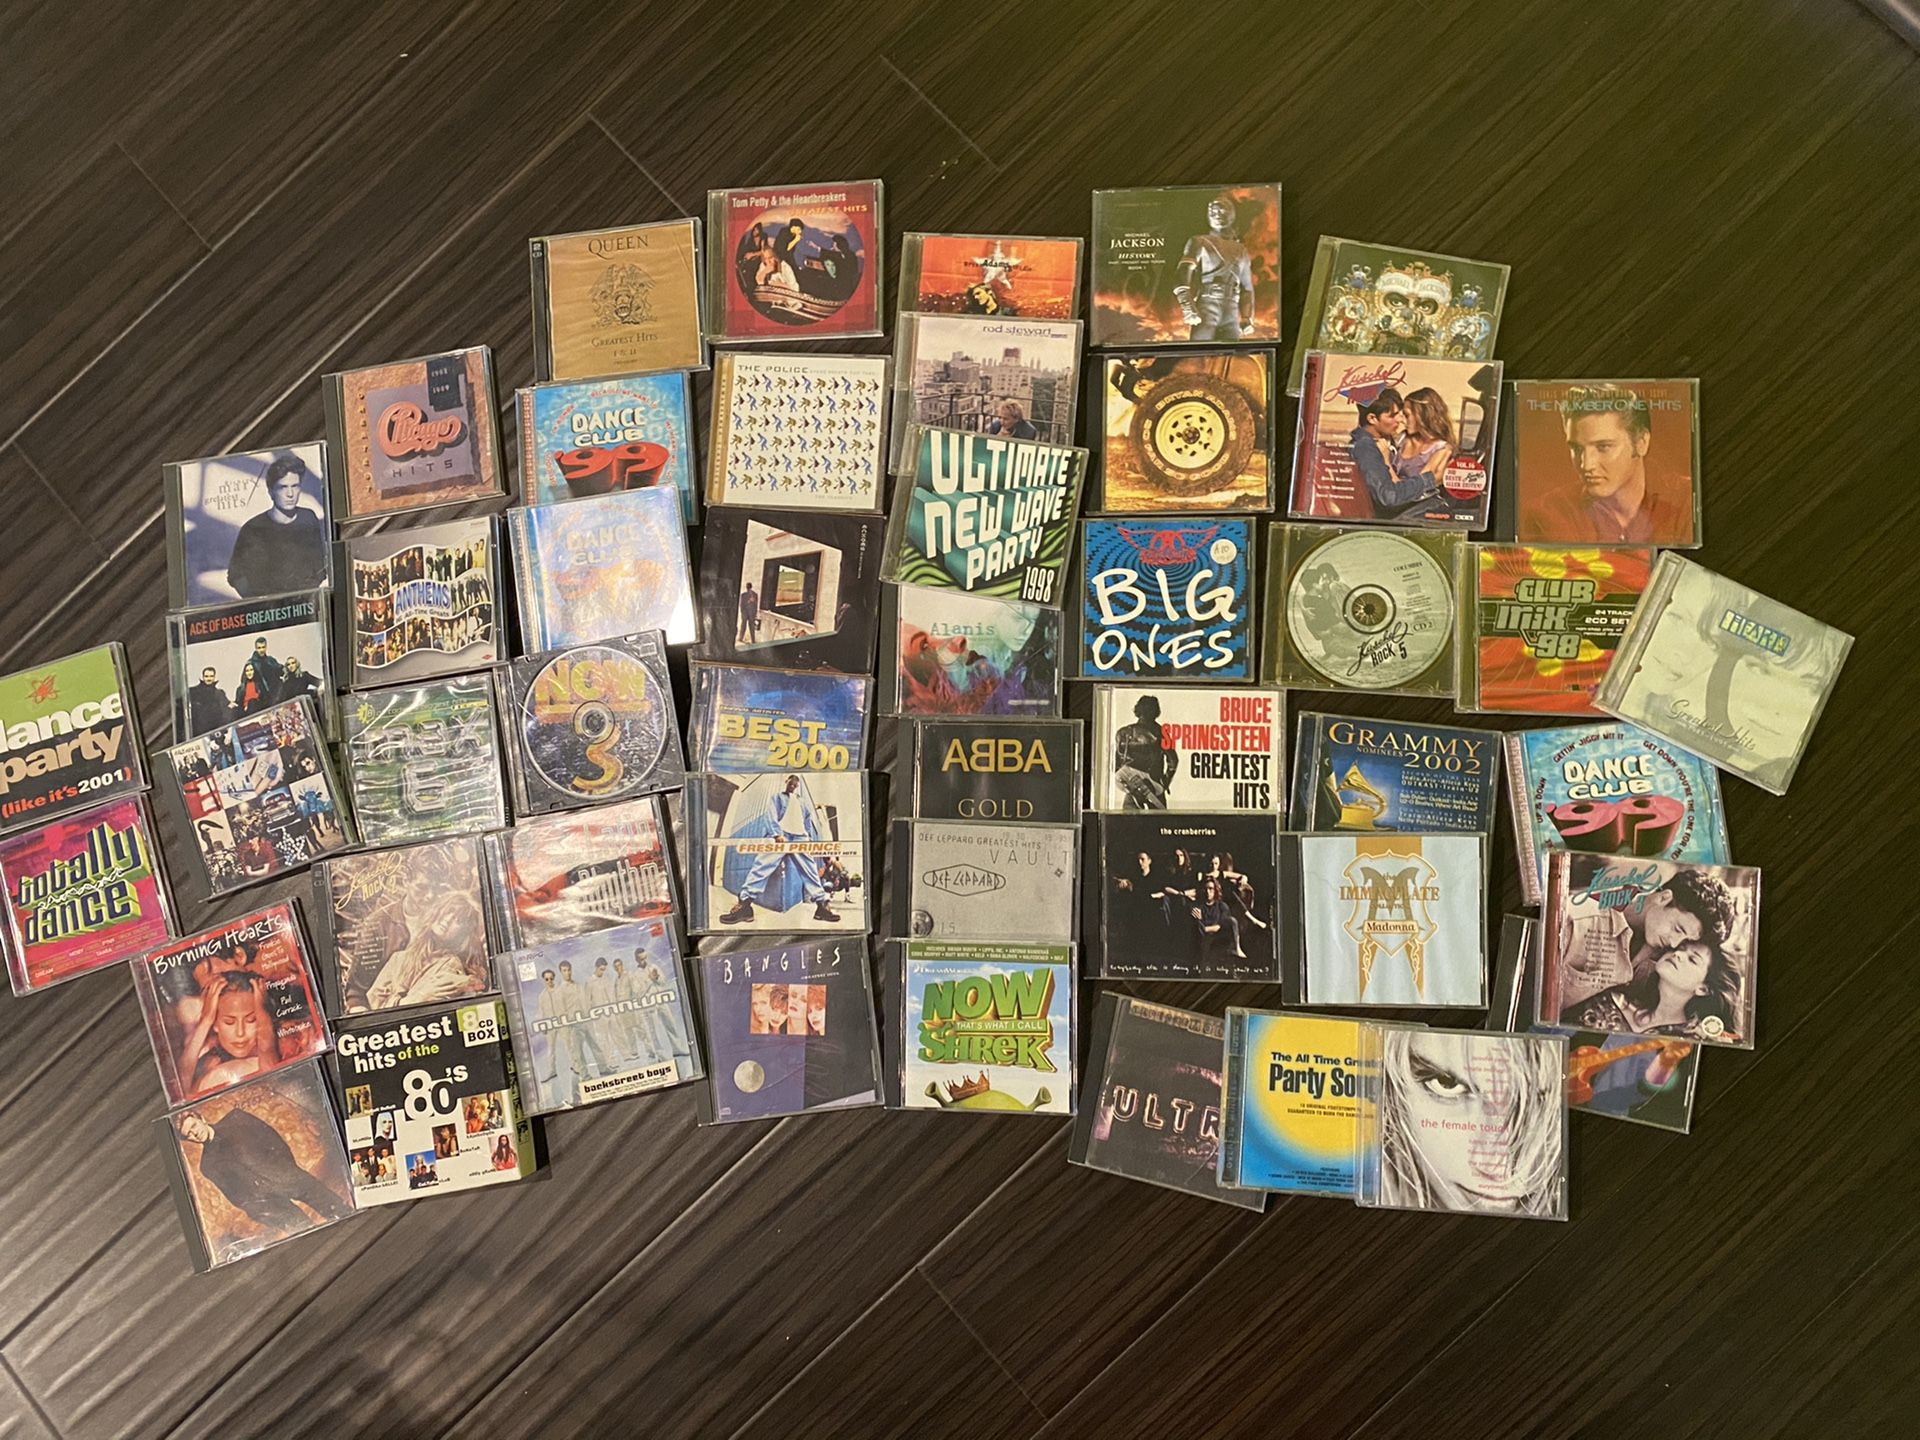 Box of over 60 music CD’s- all for $10